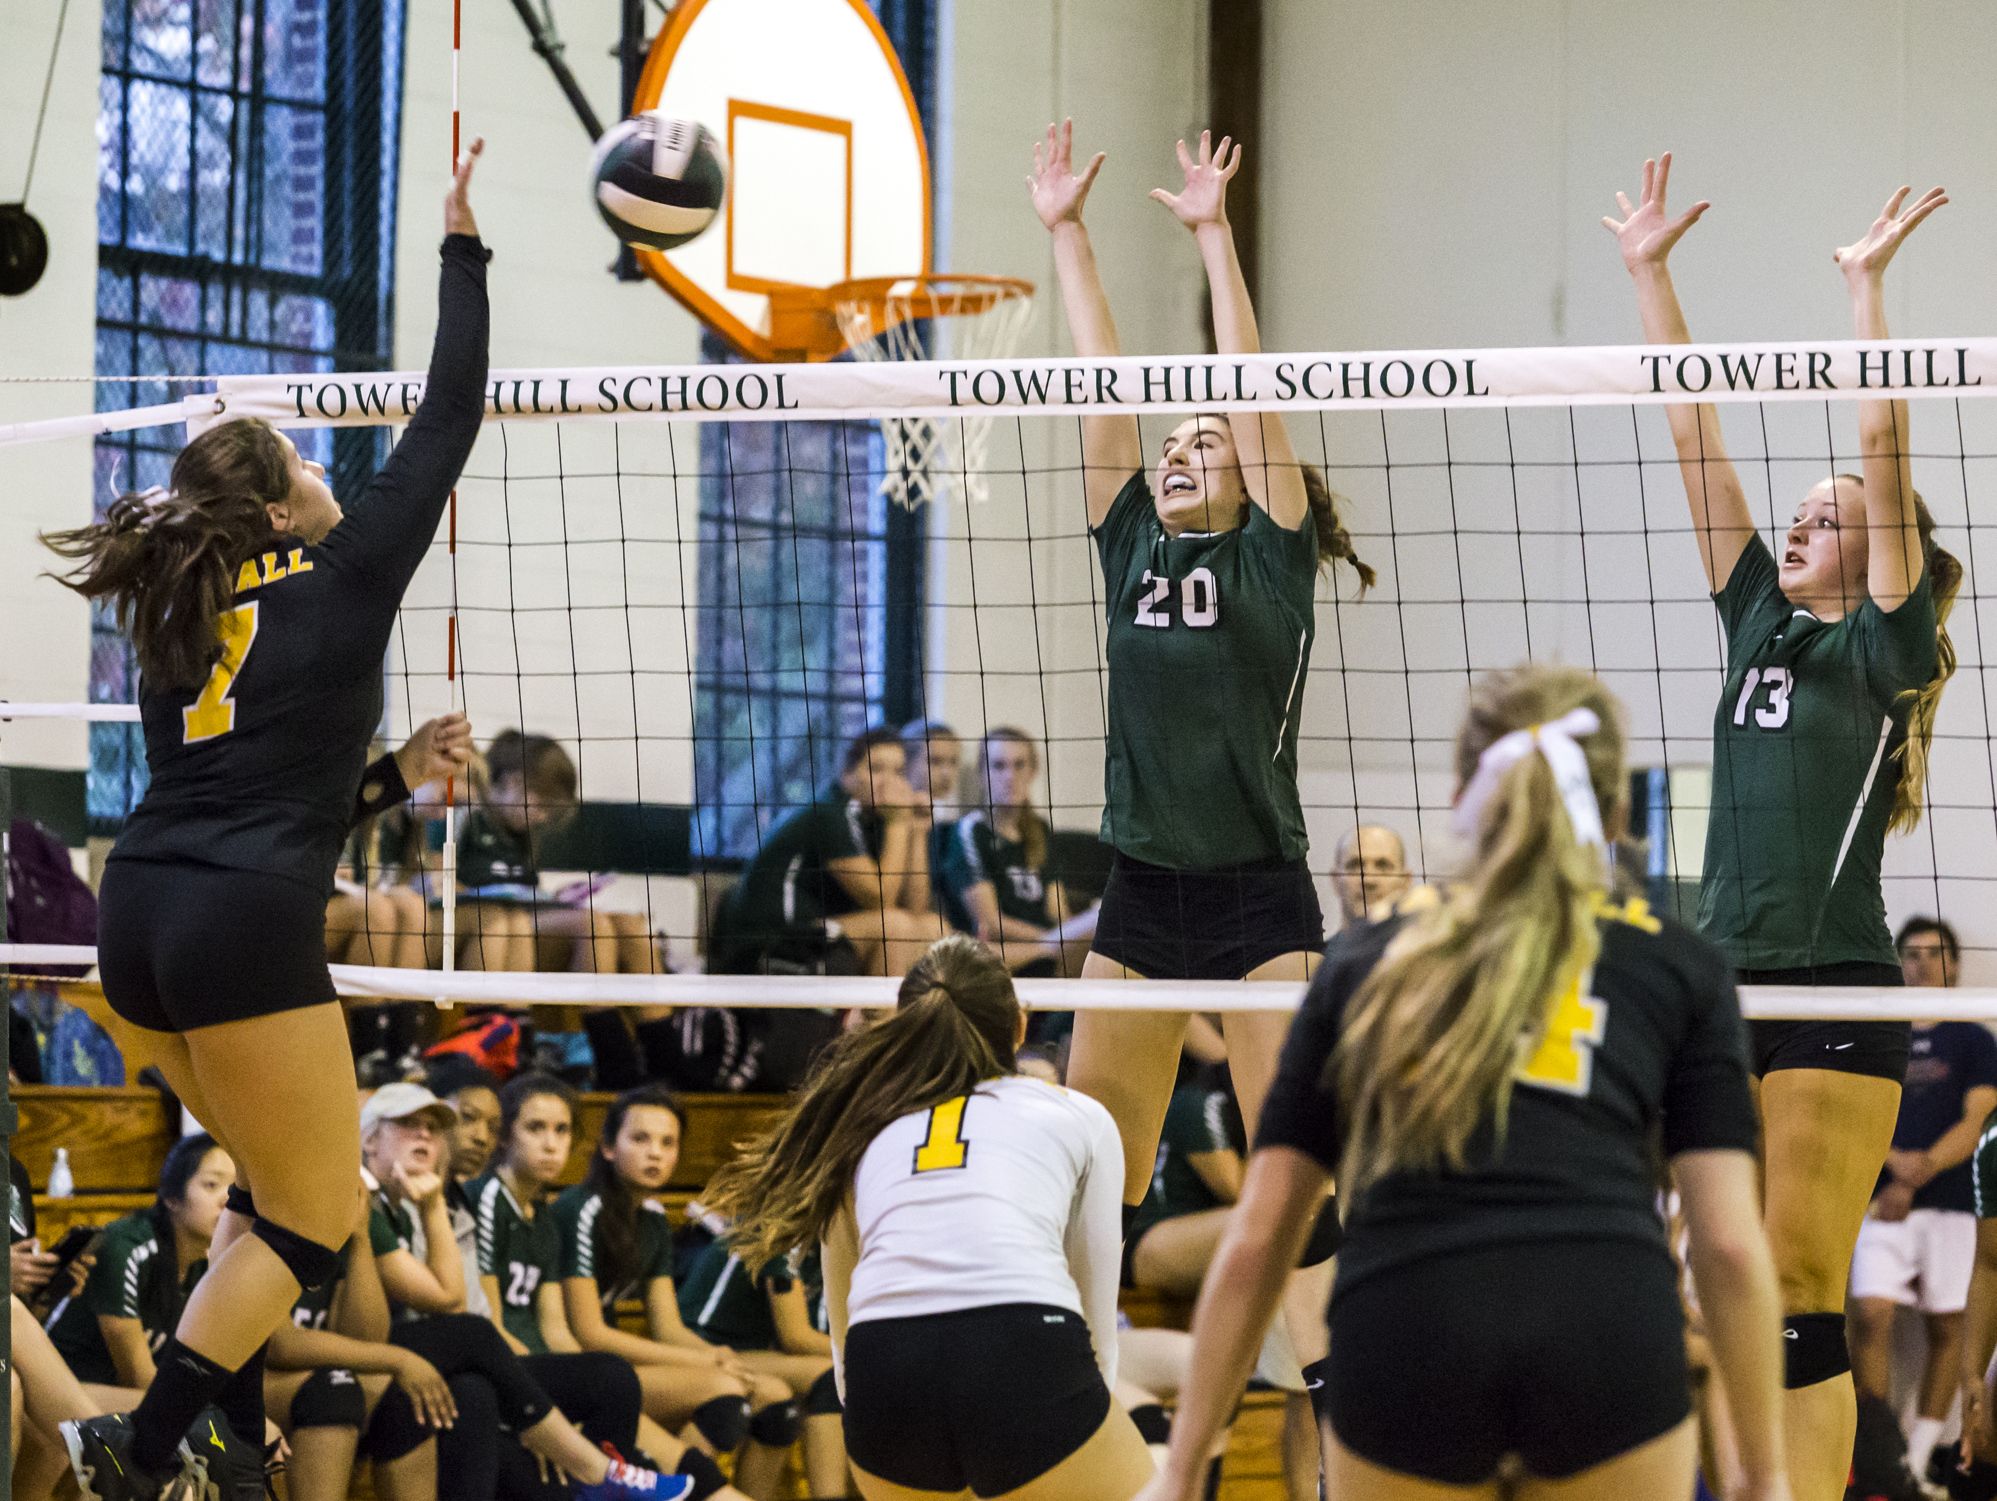 Tatnall's Mackenzie Prettyman (No. 7) hits the ball over the net as Tower Hill's Marie Freebery (No. 20) and Kyra Caffrey (No. 13) leap for a block in the third game of Tower Hill's 3-0 win over Tatnall at Tower Hill School in Wilmington on Tuesday afternoon.